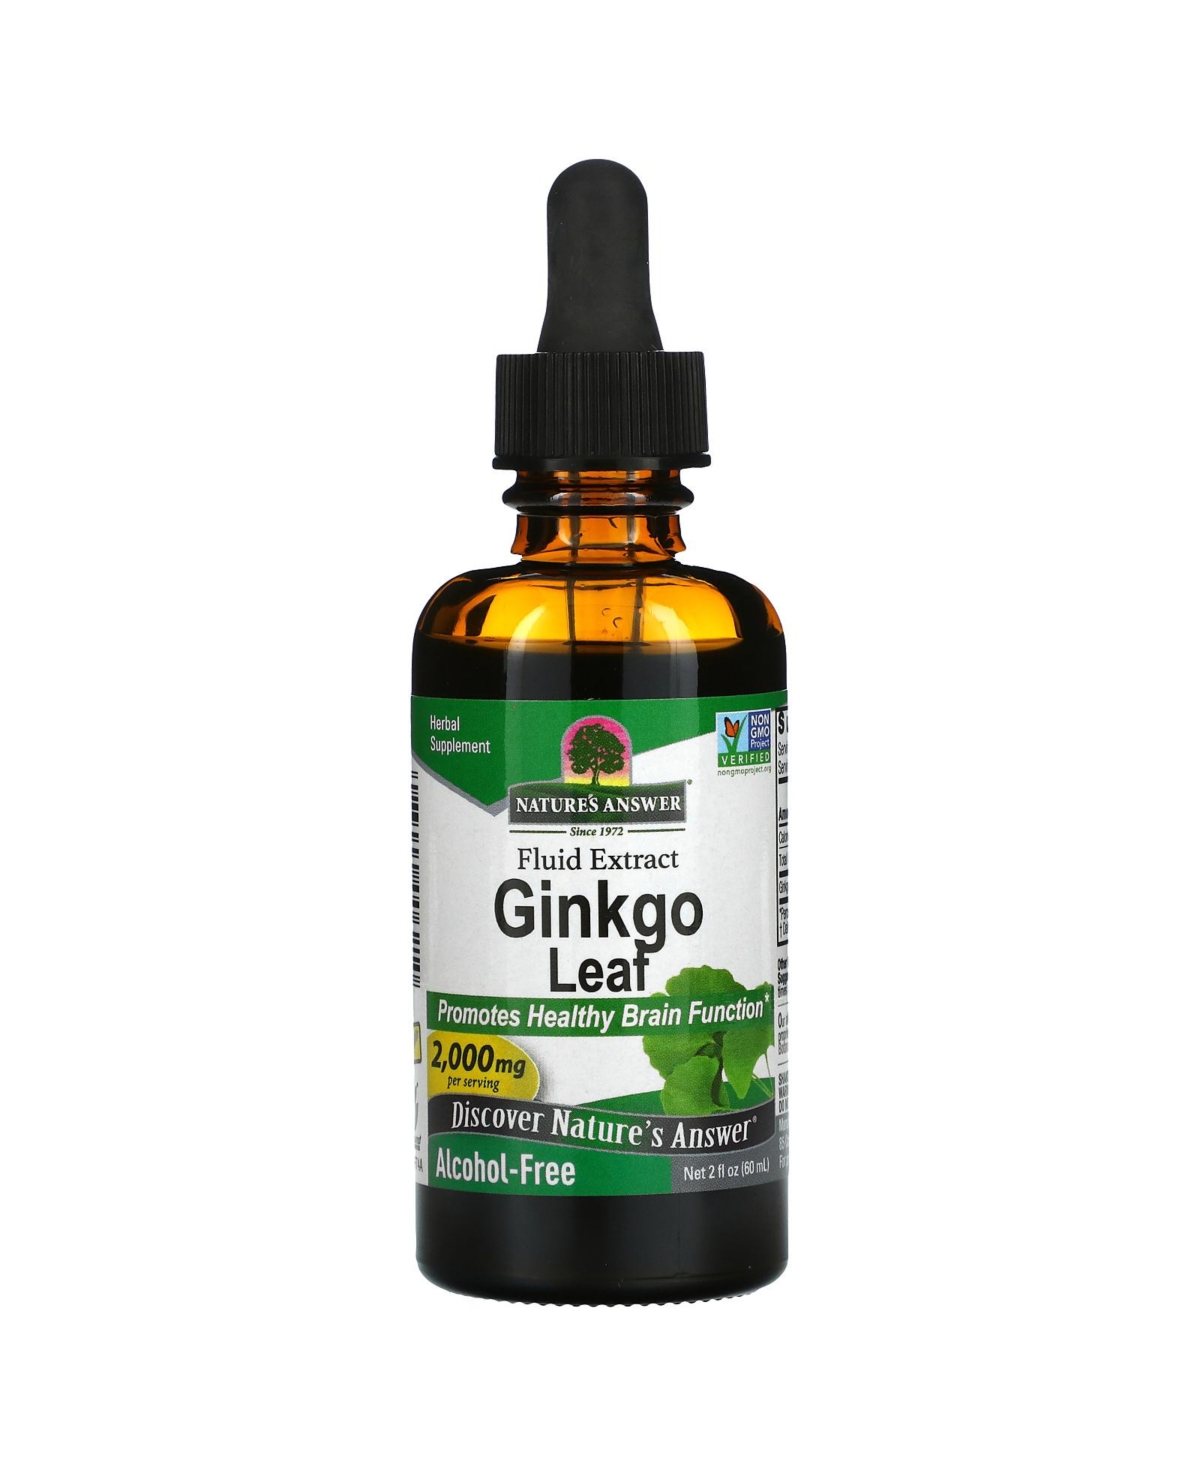 Ginkgo Leaf Fluid Extract Alcohol-Free 2 000 mg 2 fl oz (60 ml) (1 - 000 - Assorted Pre-pack (See Table